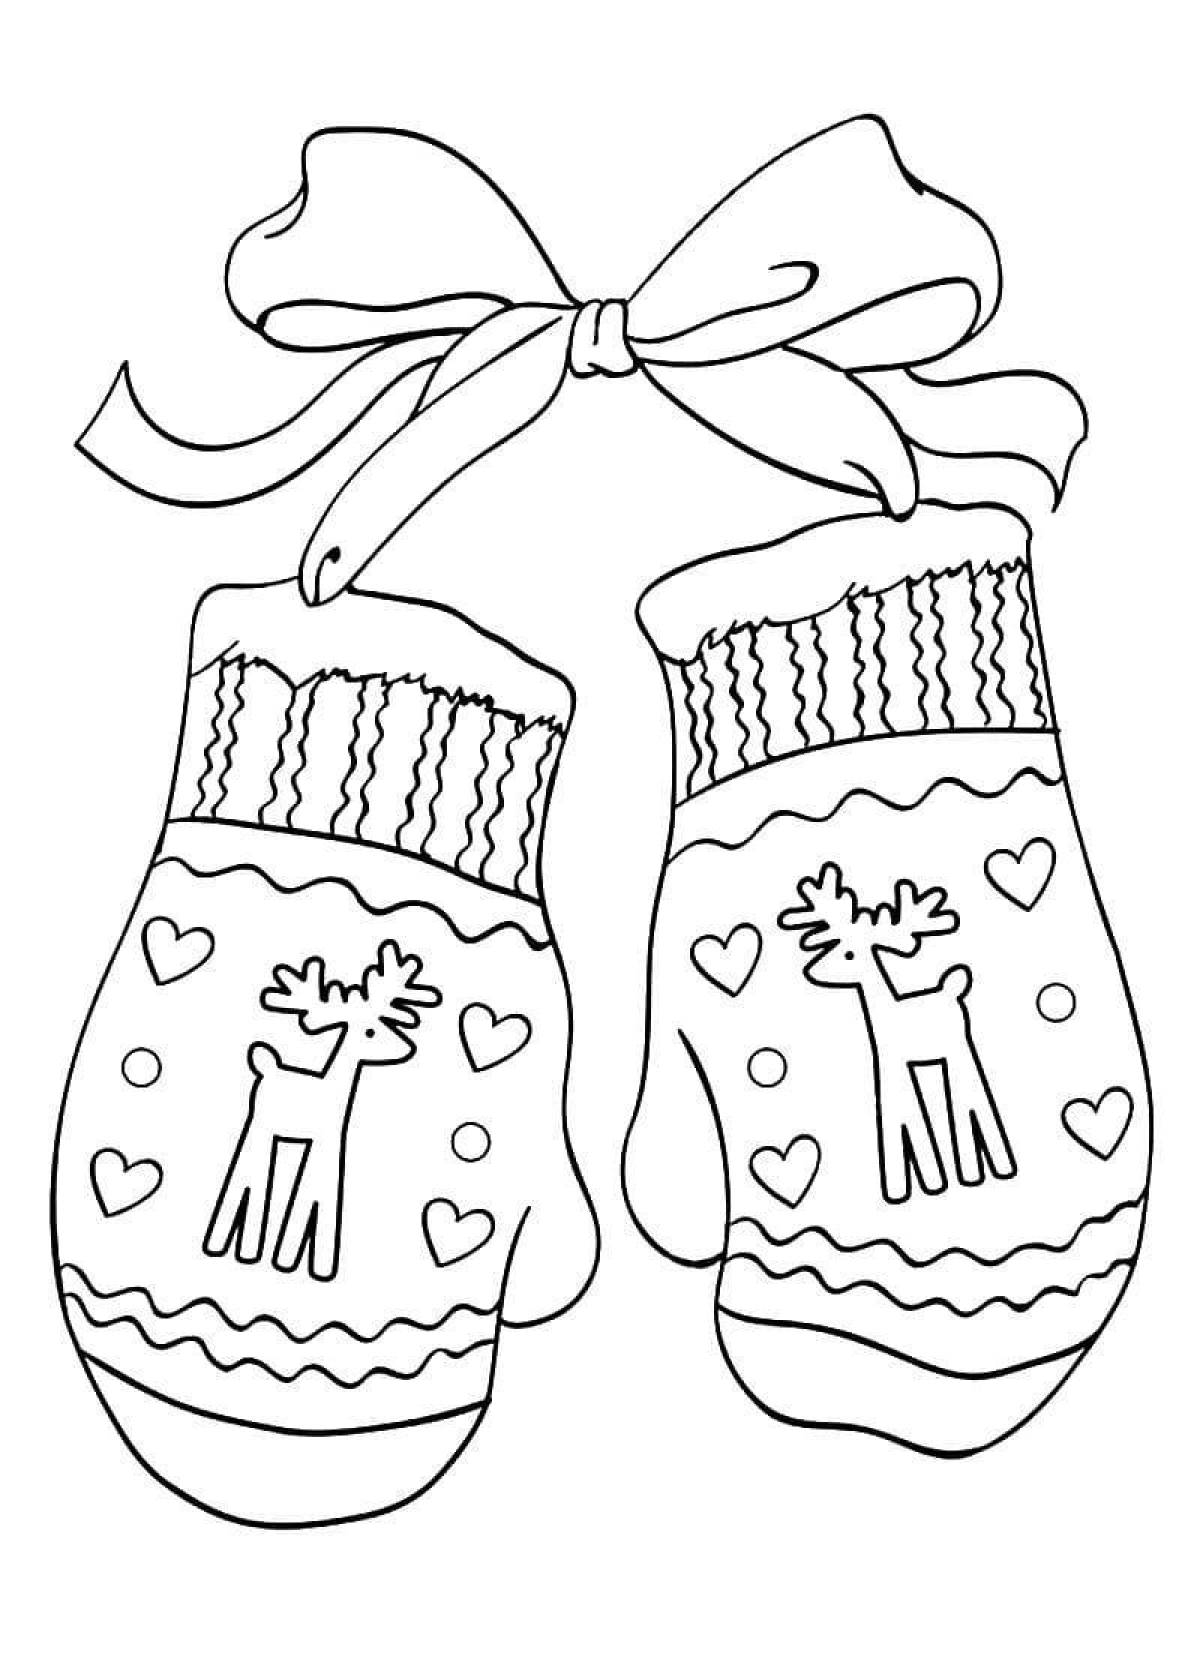 Fancy mitten coloring book for 3-4 year olds